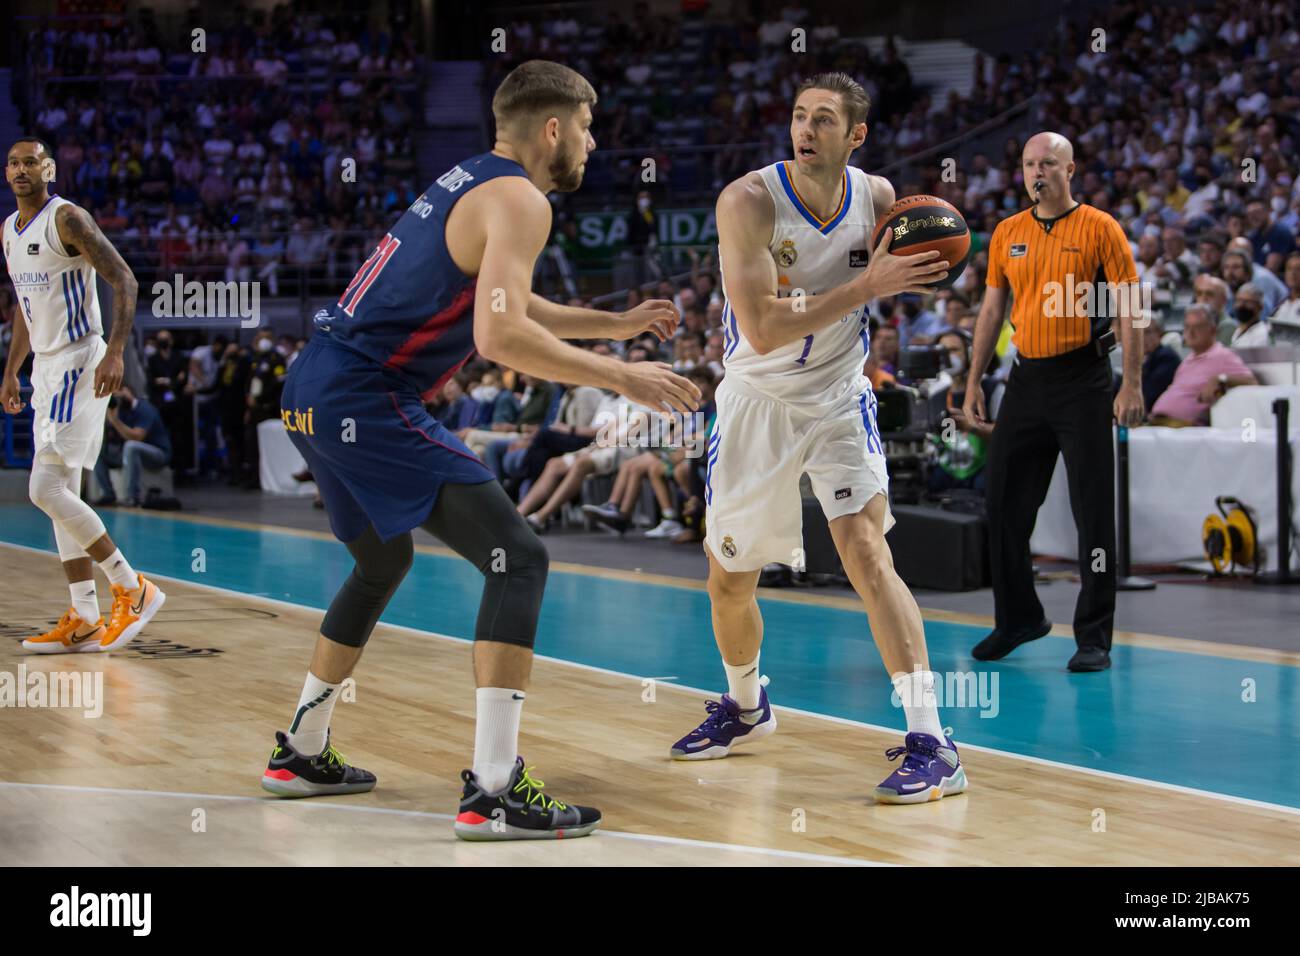 Madrid, Spain. 04th June, 2022. Fabien Causuer (R) during Liga Endesa Playoff 2022 semifinals game 2 between Real Madrid and Bitci Baskonia celebrated at Wizink Center in Madrid (Spain), June 4th 2022. Real Madrid won 83 - 71 (Photo by Juan Carlos García Mate/Pacific Press) Credit: Pacific Press Media Production Corp./Alamy Live News Stock Photo